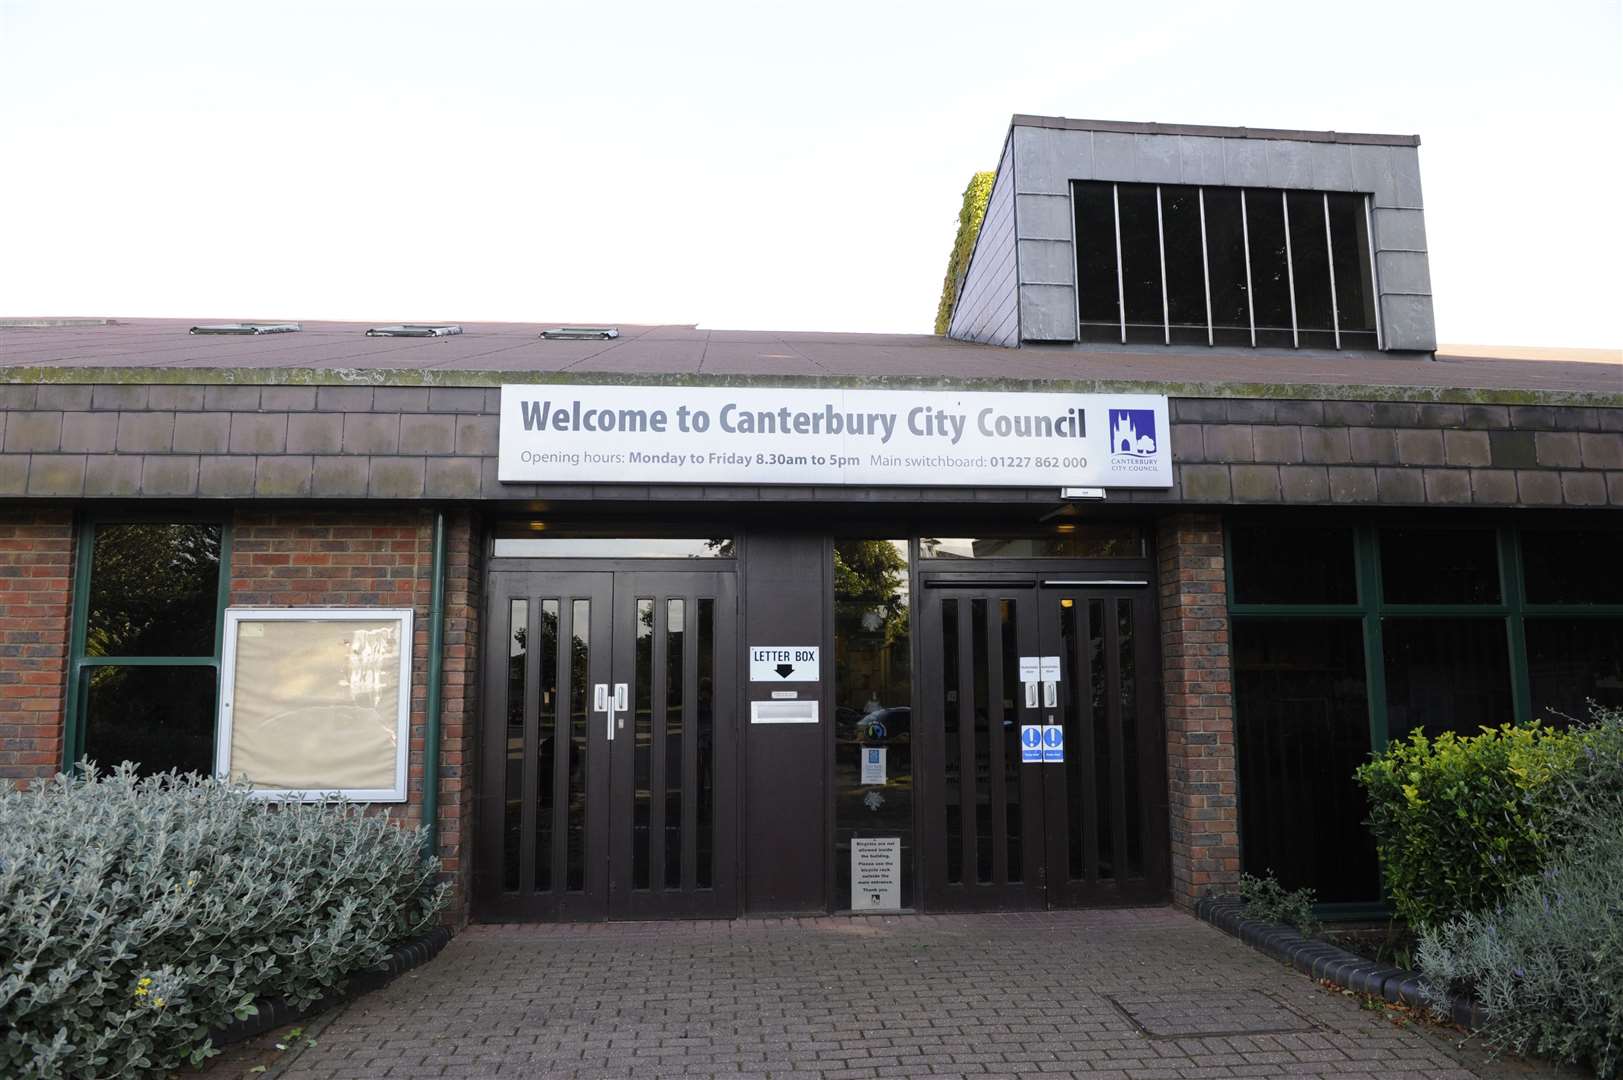 Canterbury City Council could increase by 25% to 49 councillors under proposals agreed by members which will now be reviewed